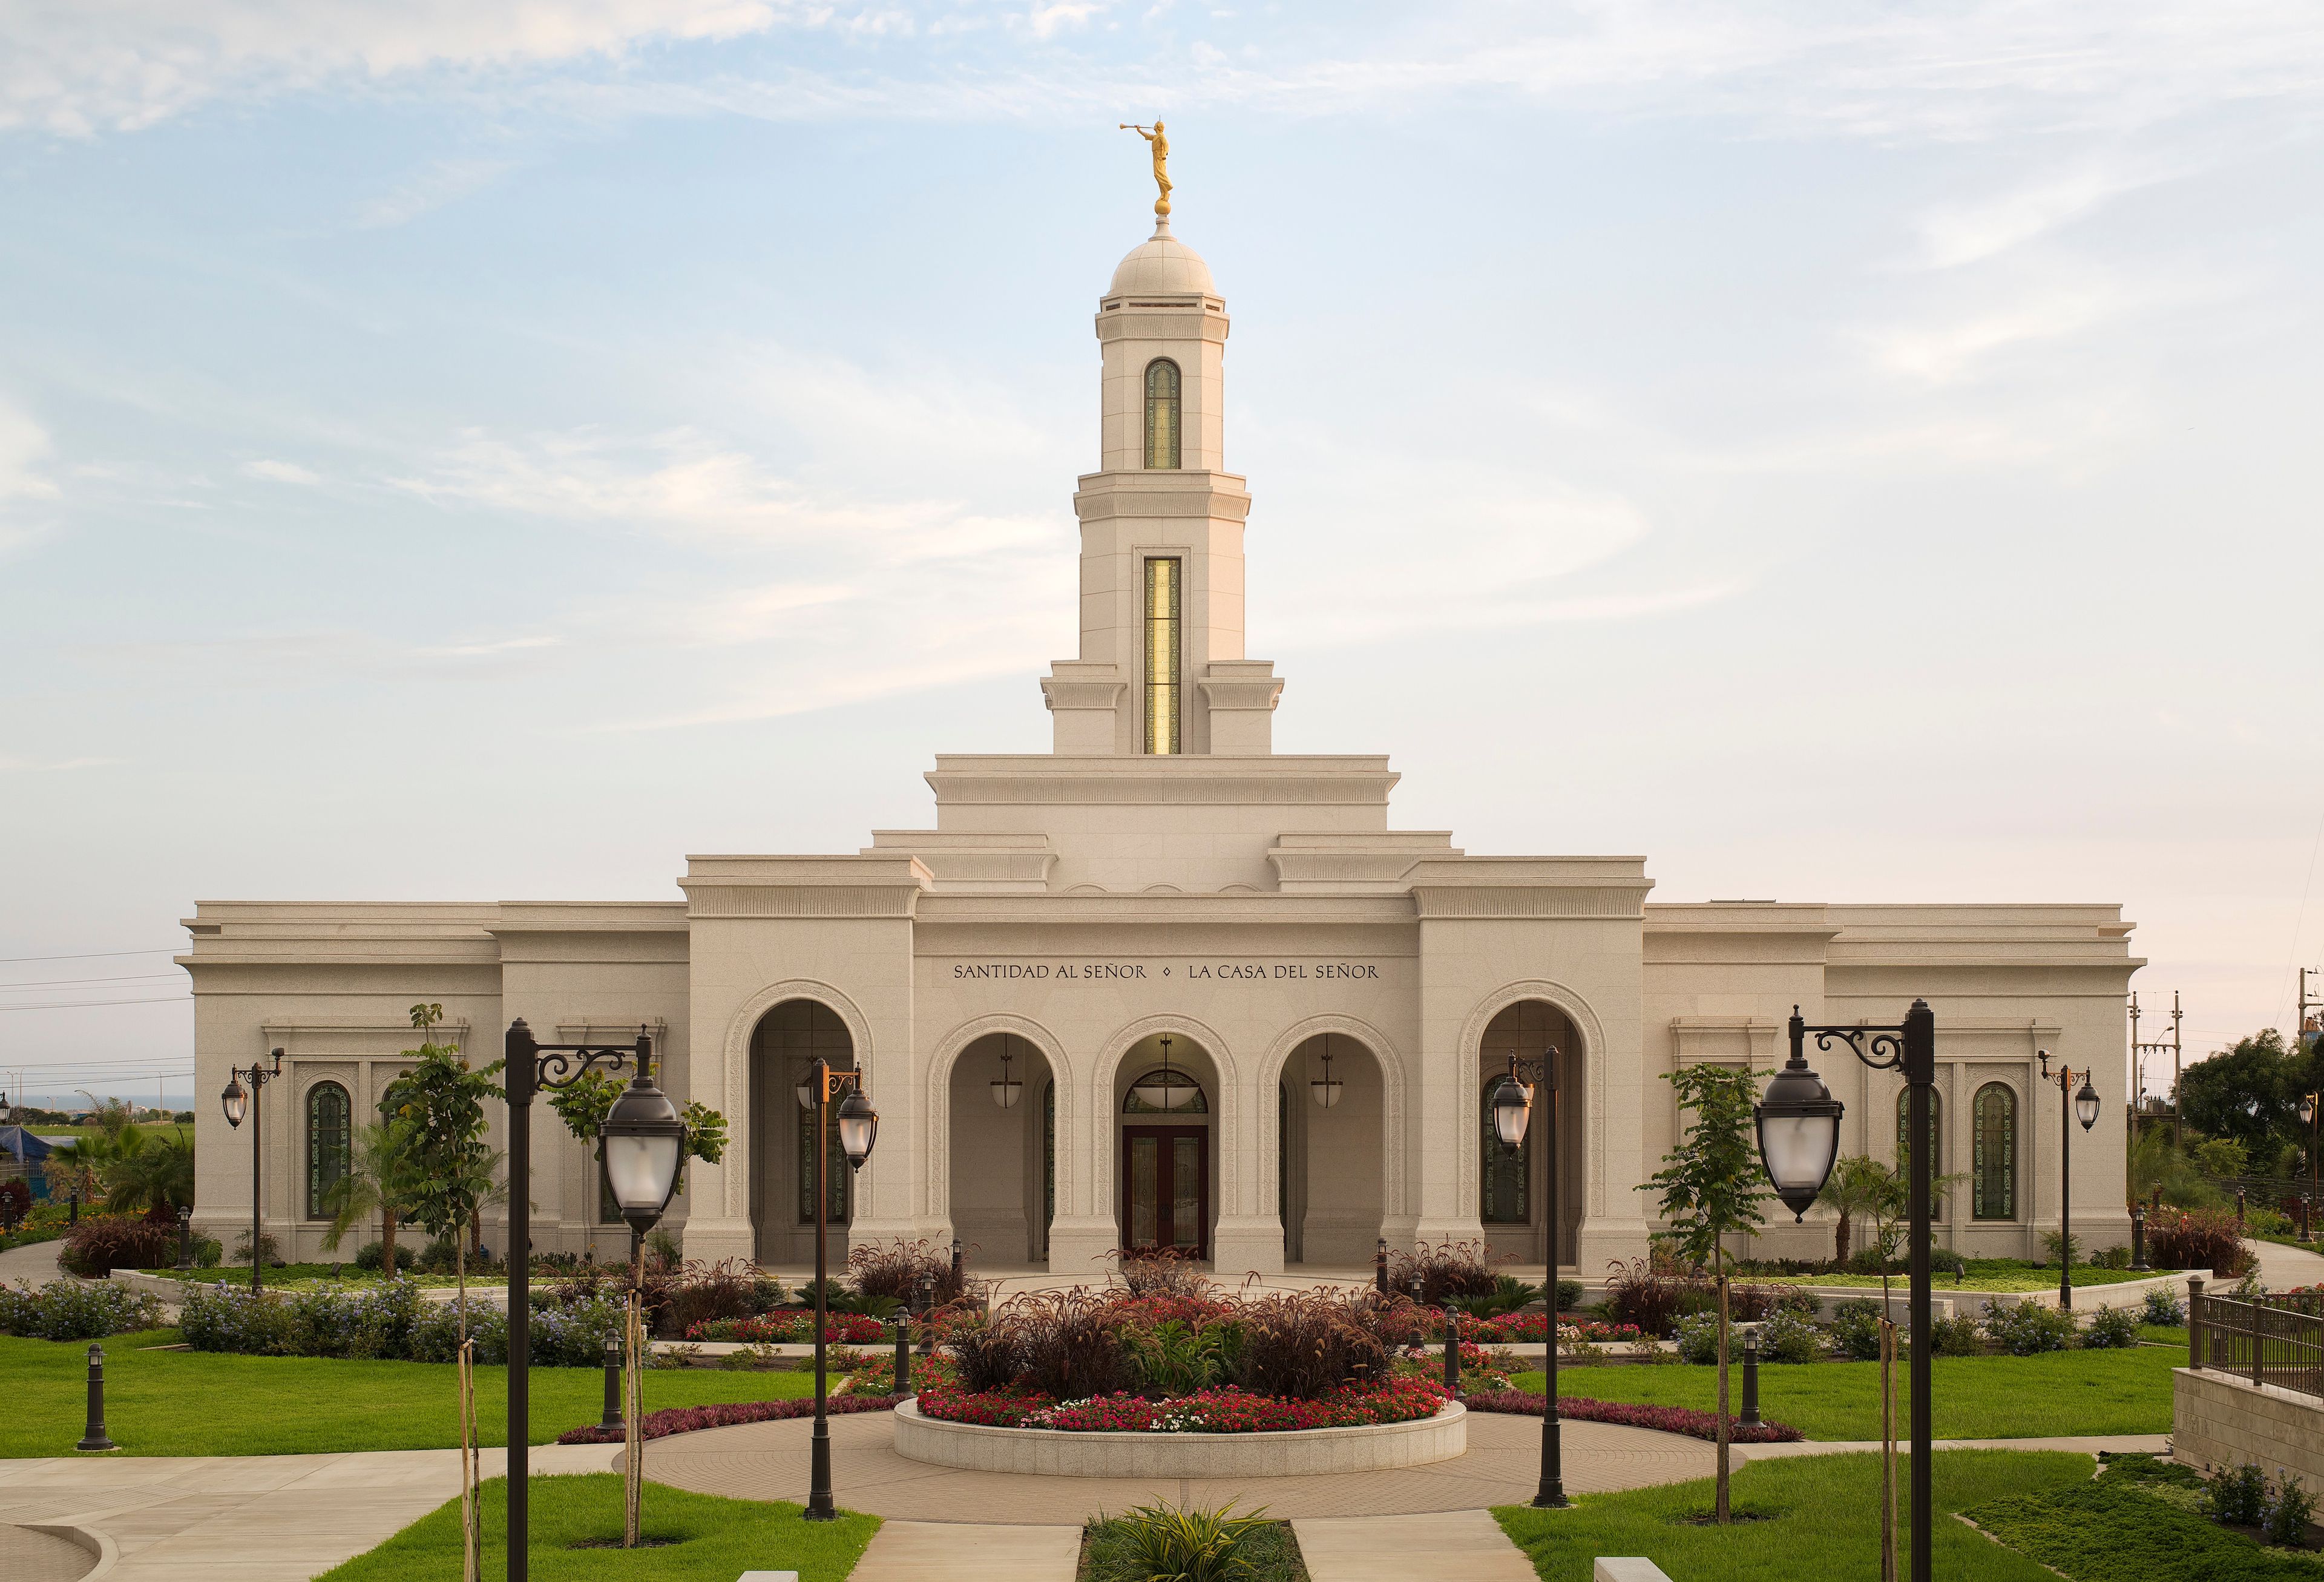 The front of the Trujillo Peru Temple and grounds in the daytime.